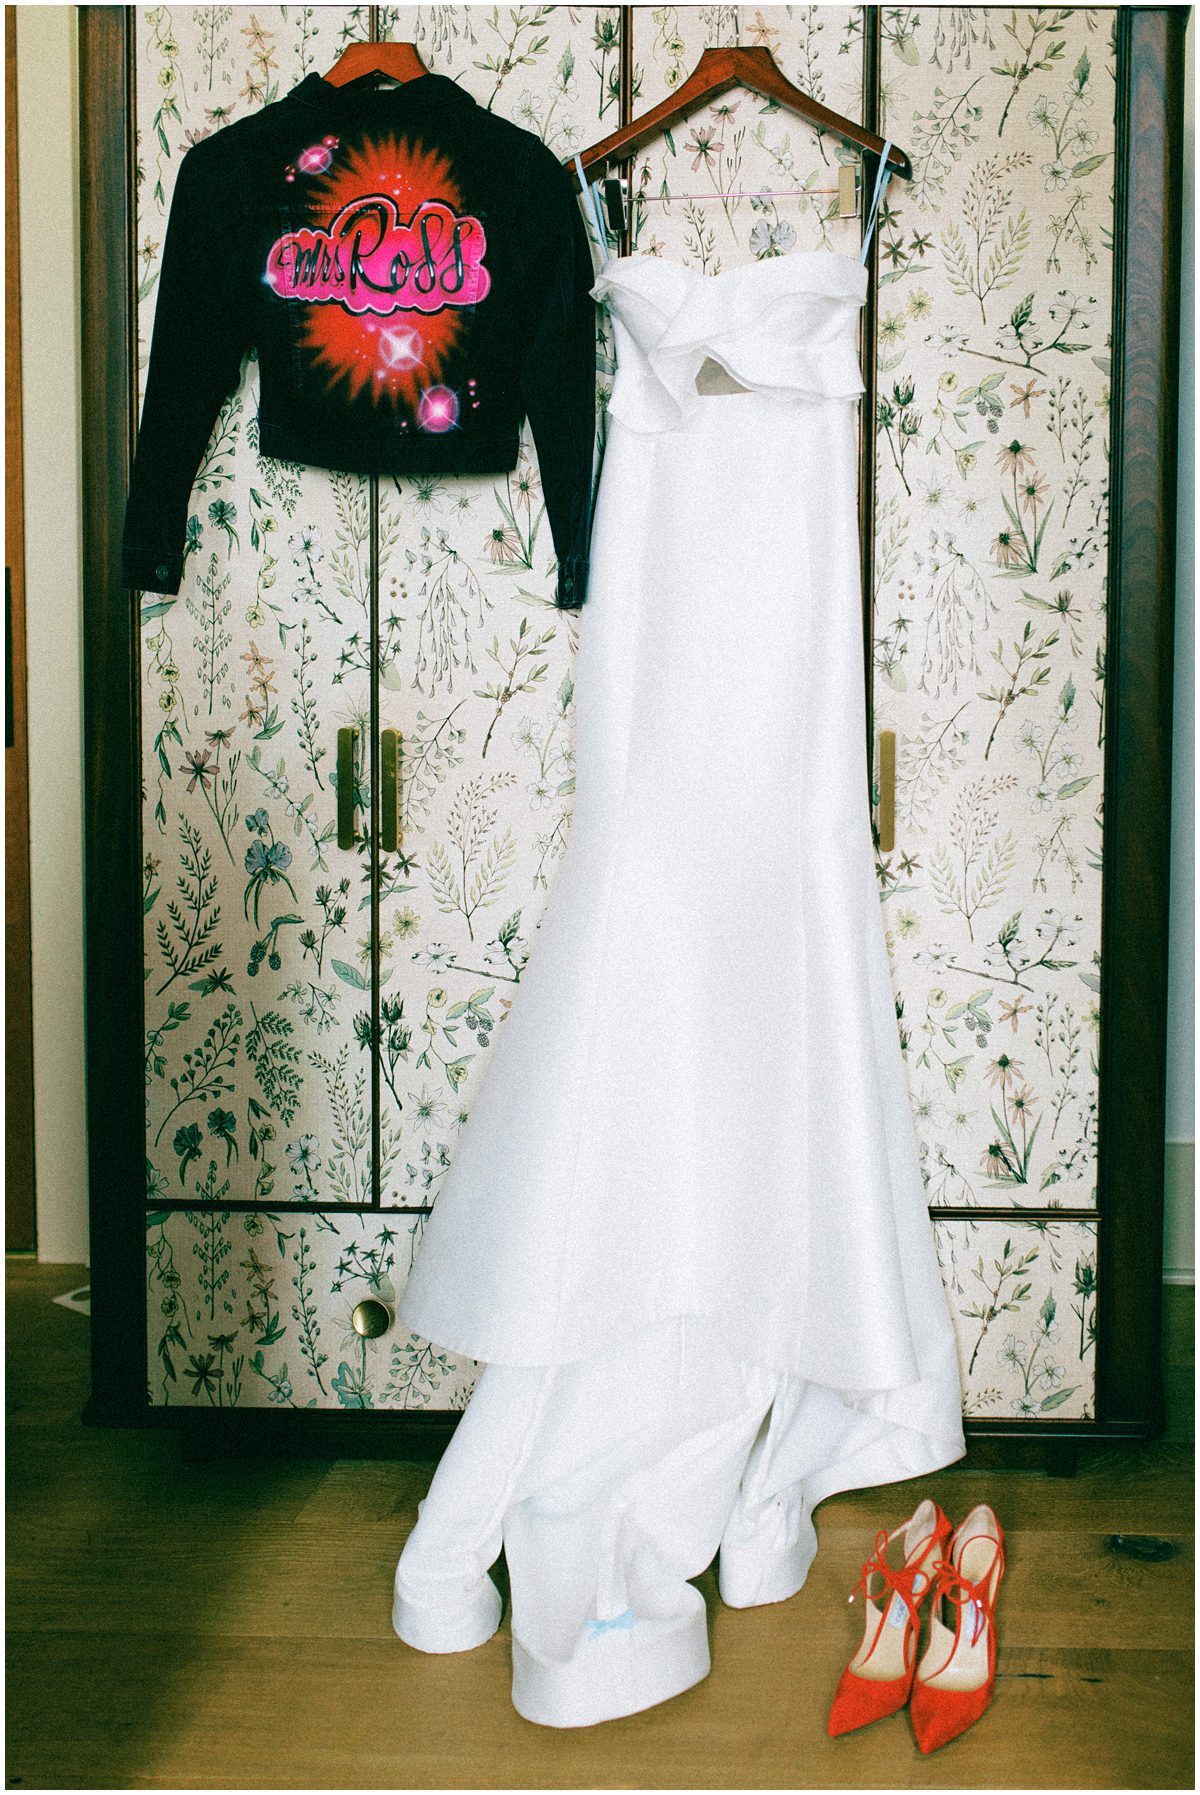 modern wedding gown hanging up with red jimmy choo shoes and fun spray paint jacket